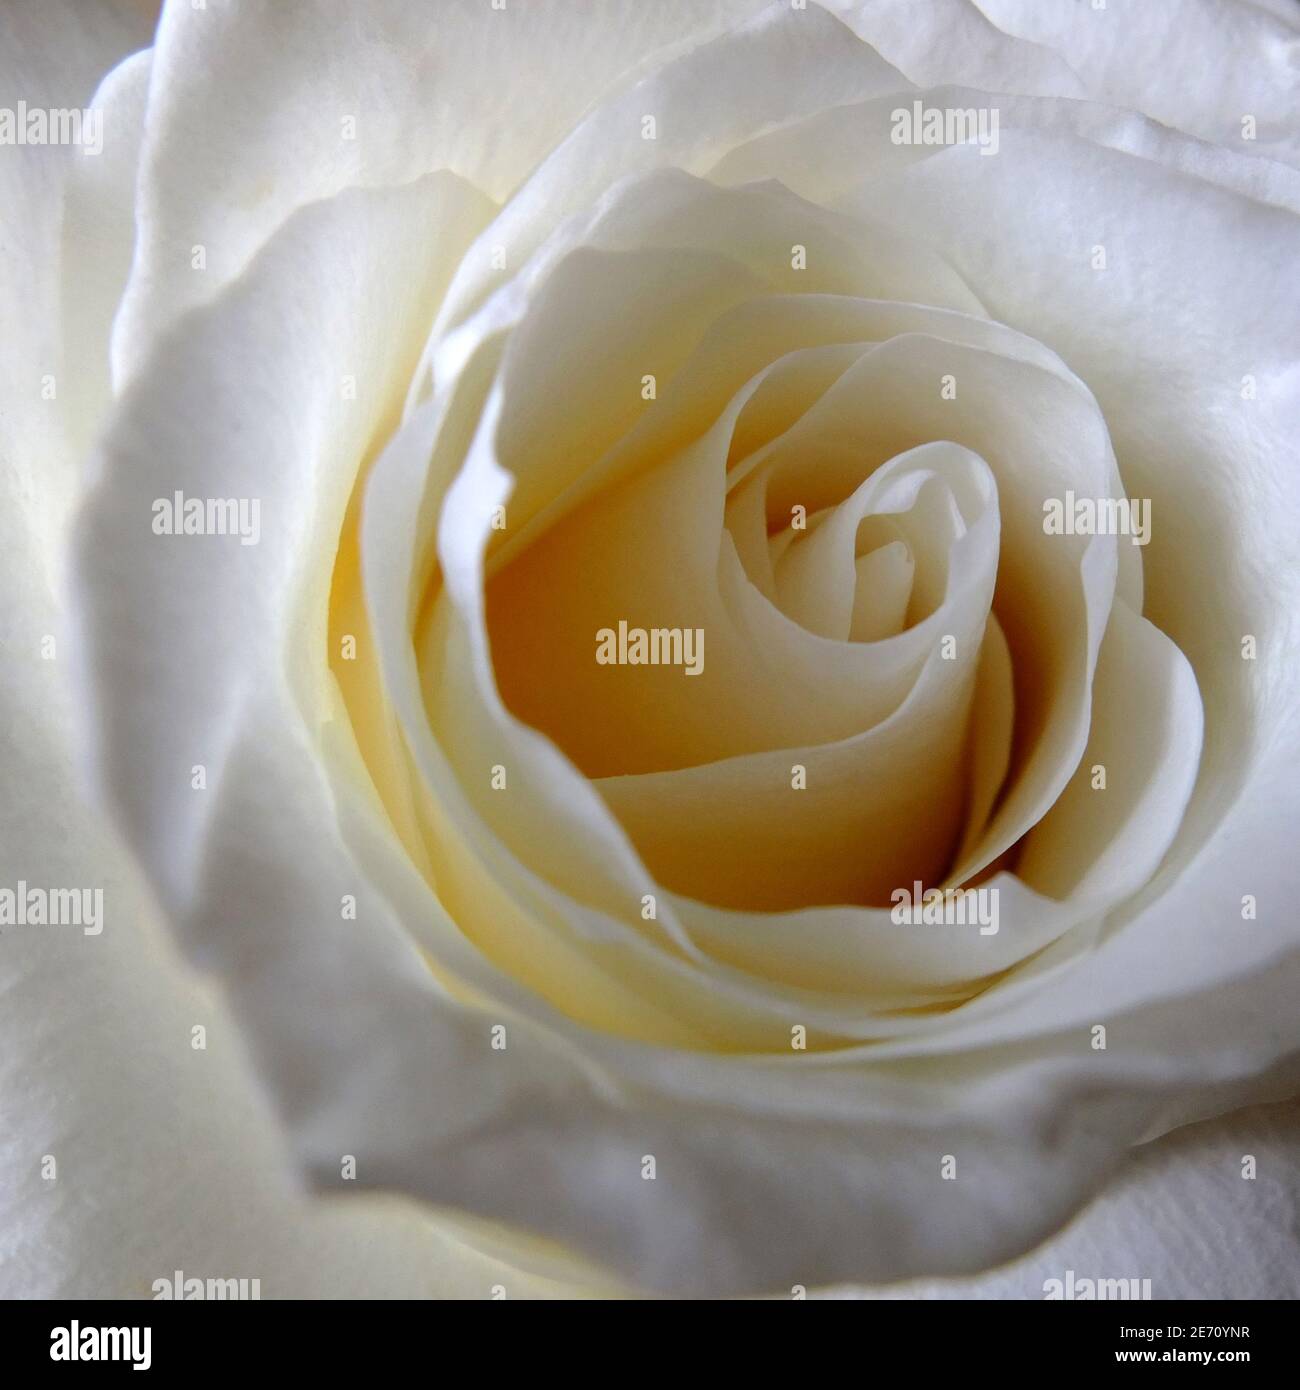 Rose flower head Cream colour with delicate swirling petals isolated close up under natural light Stock Photo